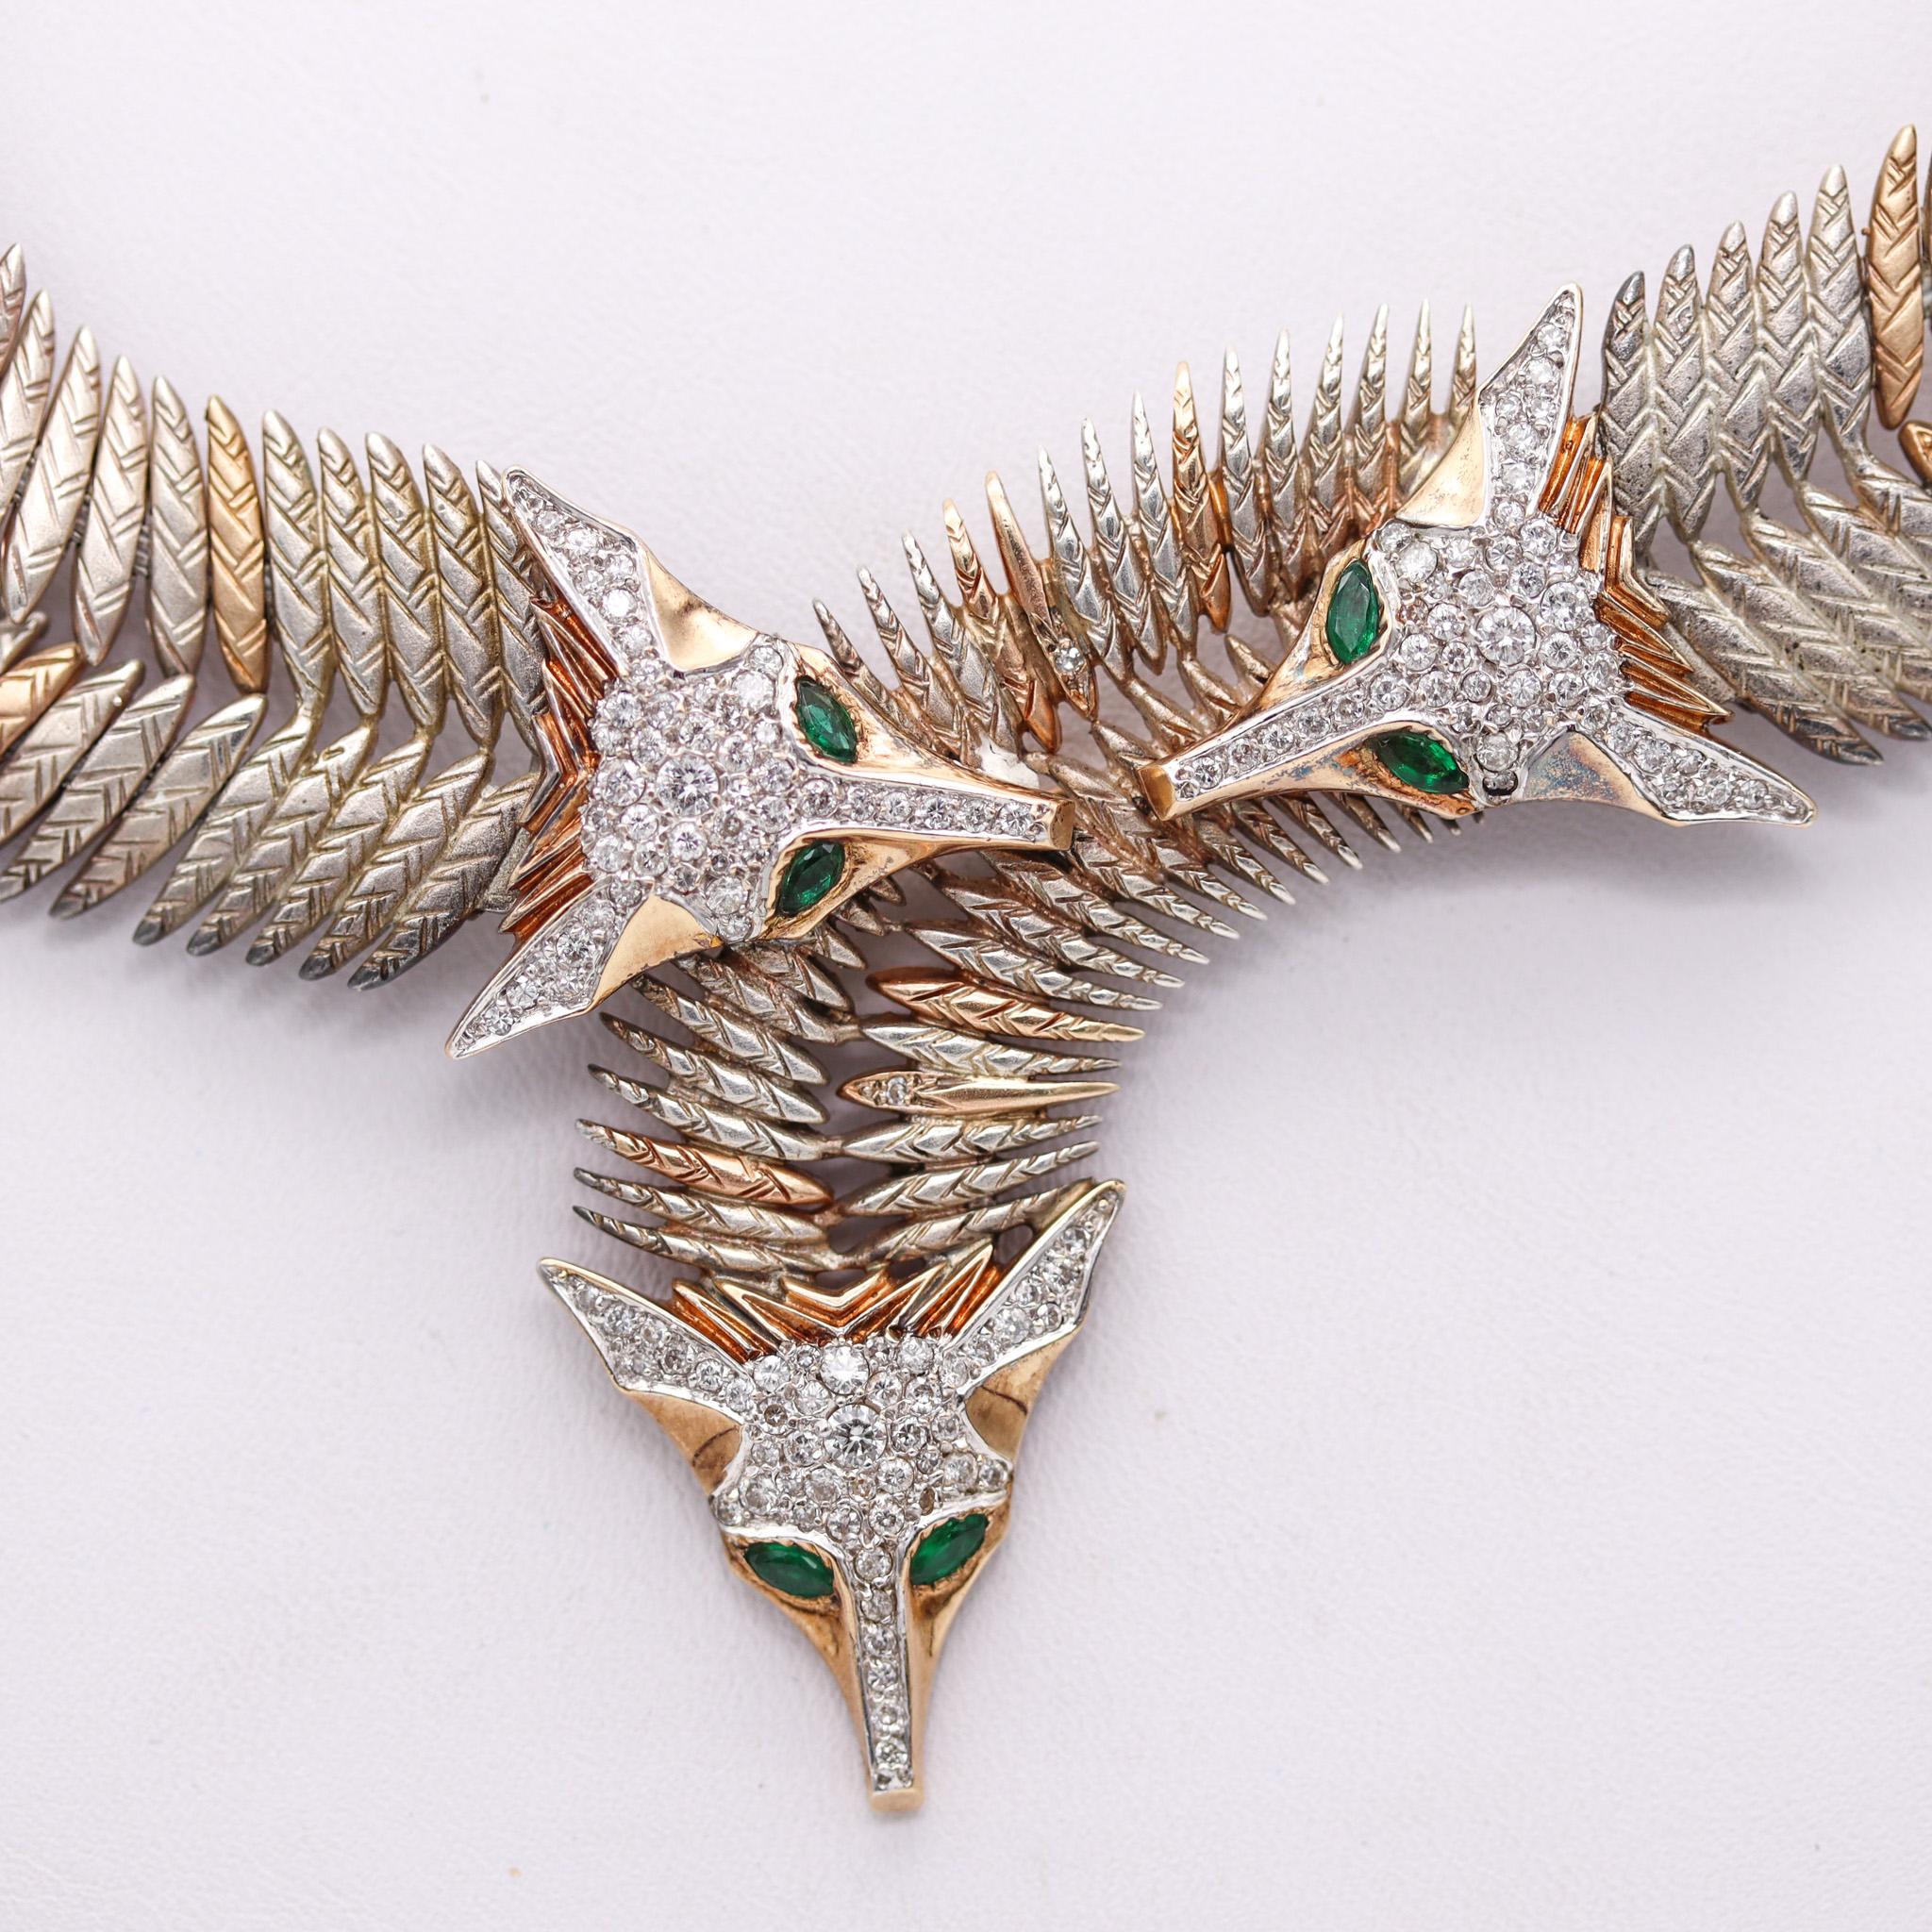 Convertible necklace designed by Erte (1892-1990).

Very rare and gorgeous convertible necklace, created in Paris France by the artist and designer Erte. This necklace is part of an artist limited edition and has been crafted in solid yellow gold of